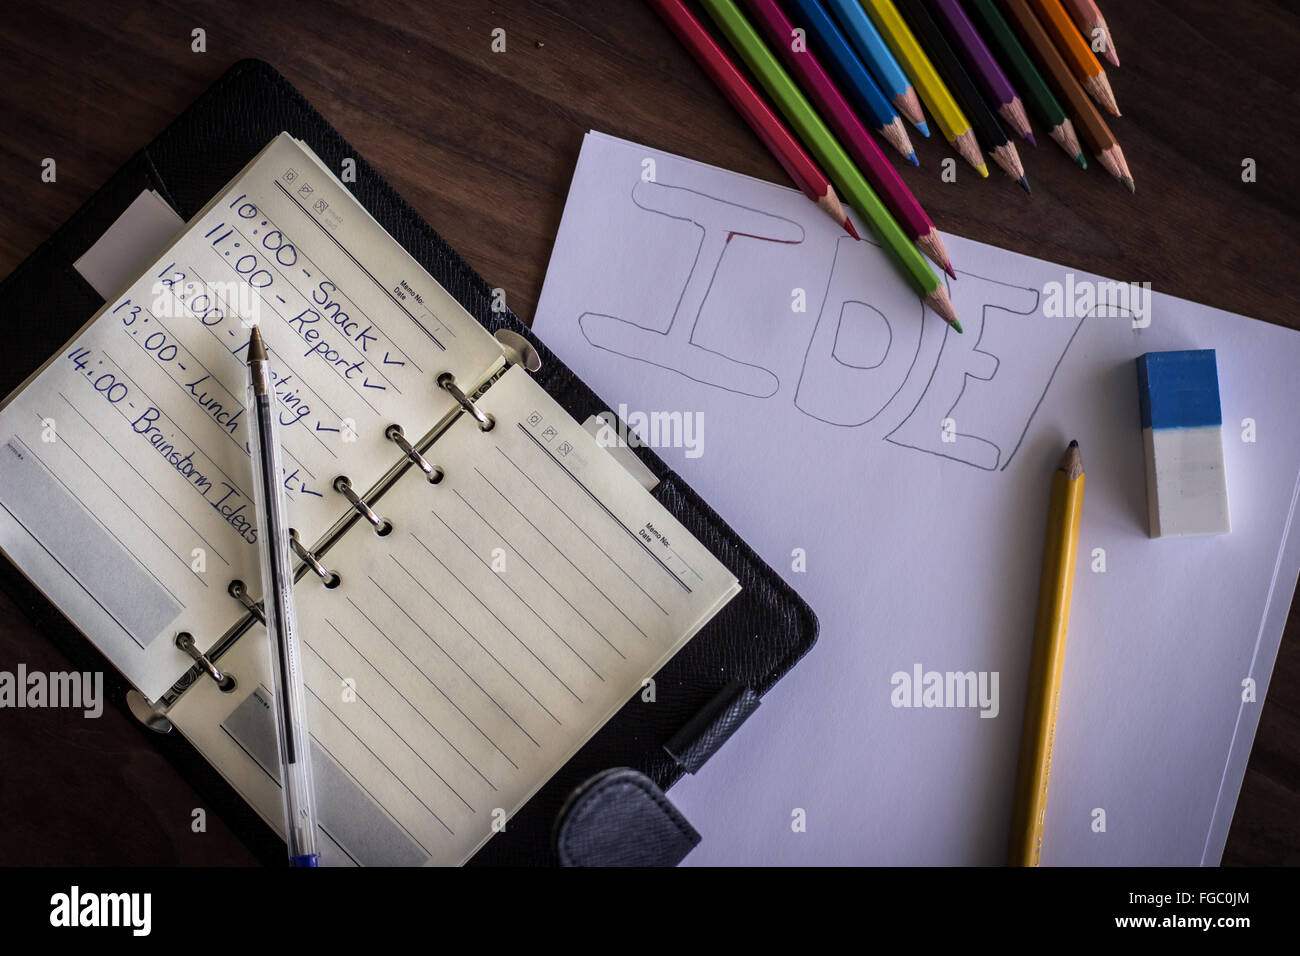 High Angle View Of Personal Organizer With Colored Pencils On Table Stock Photo